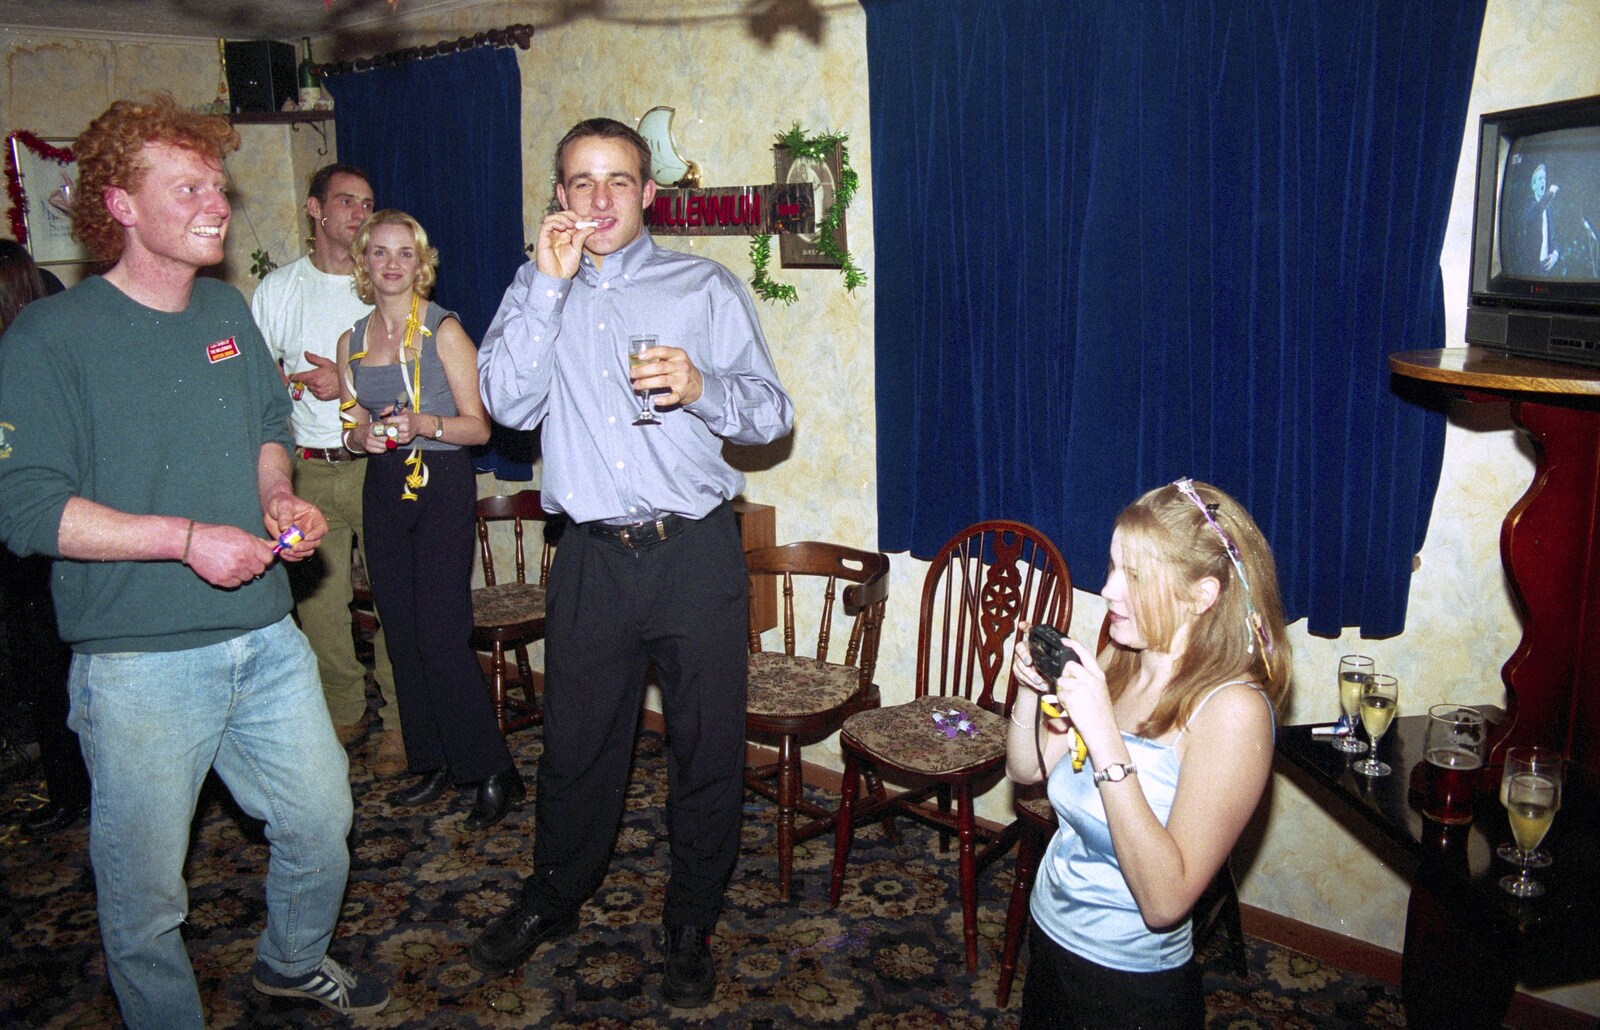 Wavy and Shane from New Year's Eve at The Swan Inn, Brome, Suffolk - 31st December 1999